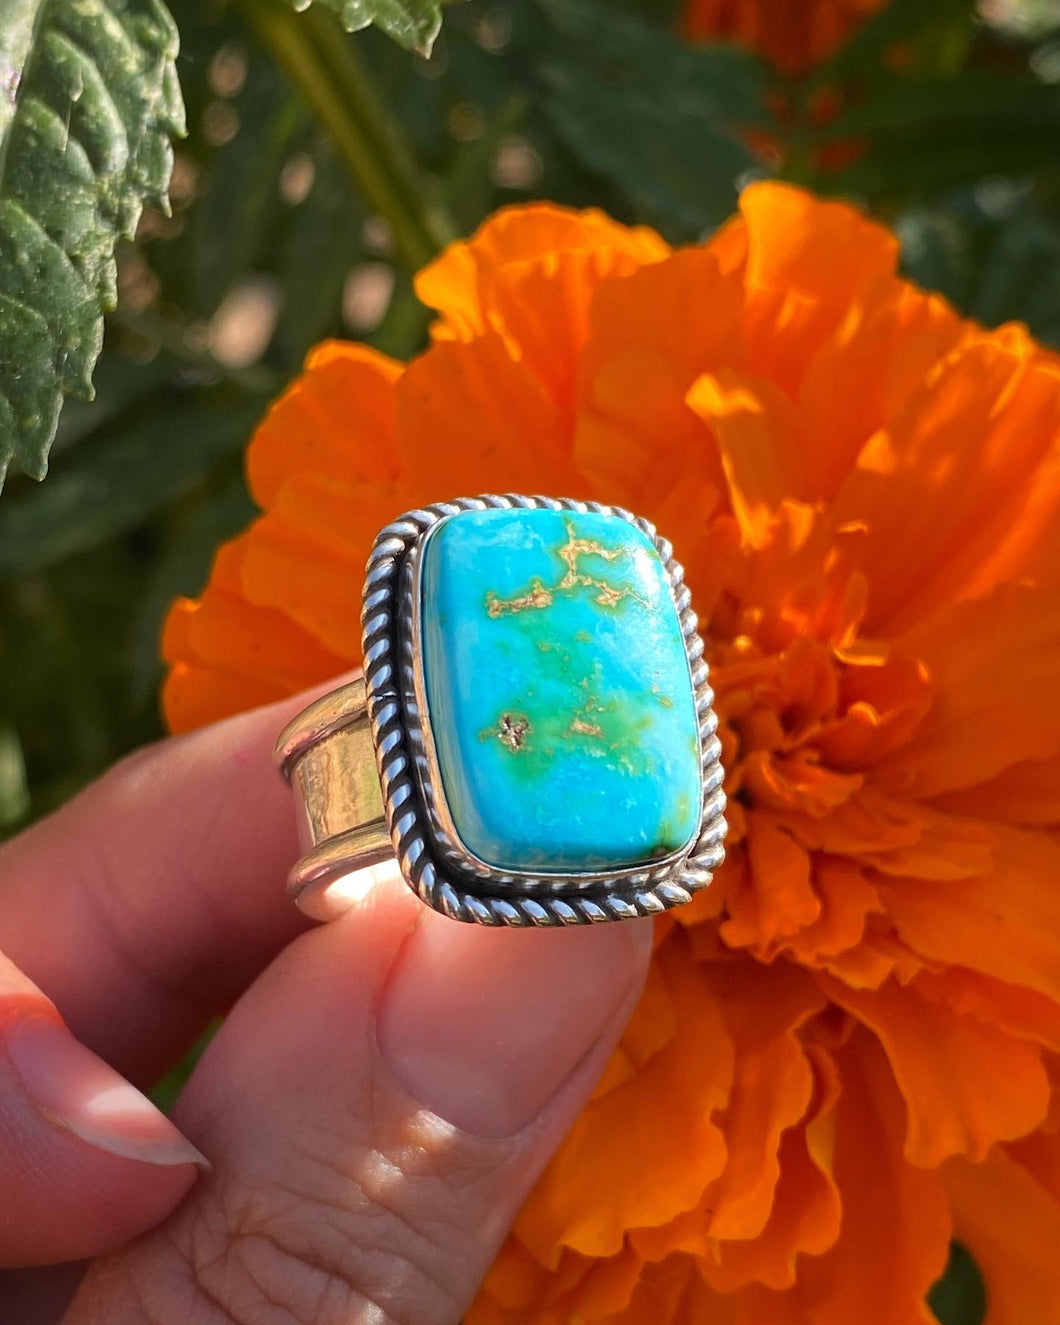 Sonoran Gold New Mex Ring — size 7 (fits like 6/6.5)